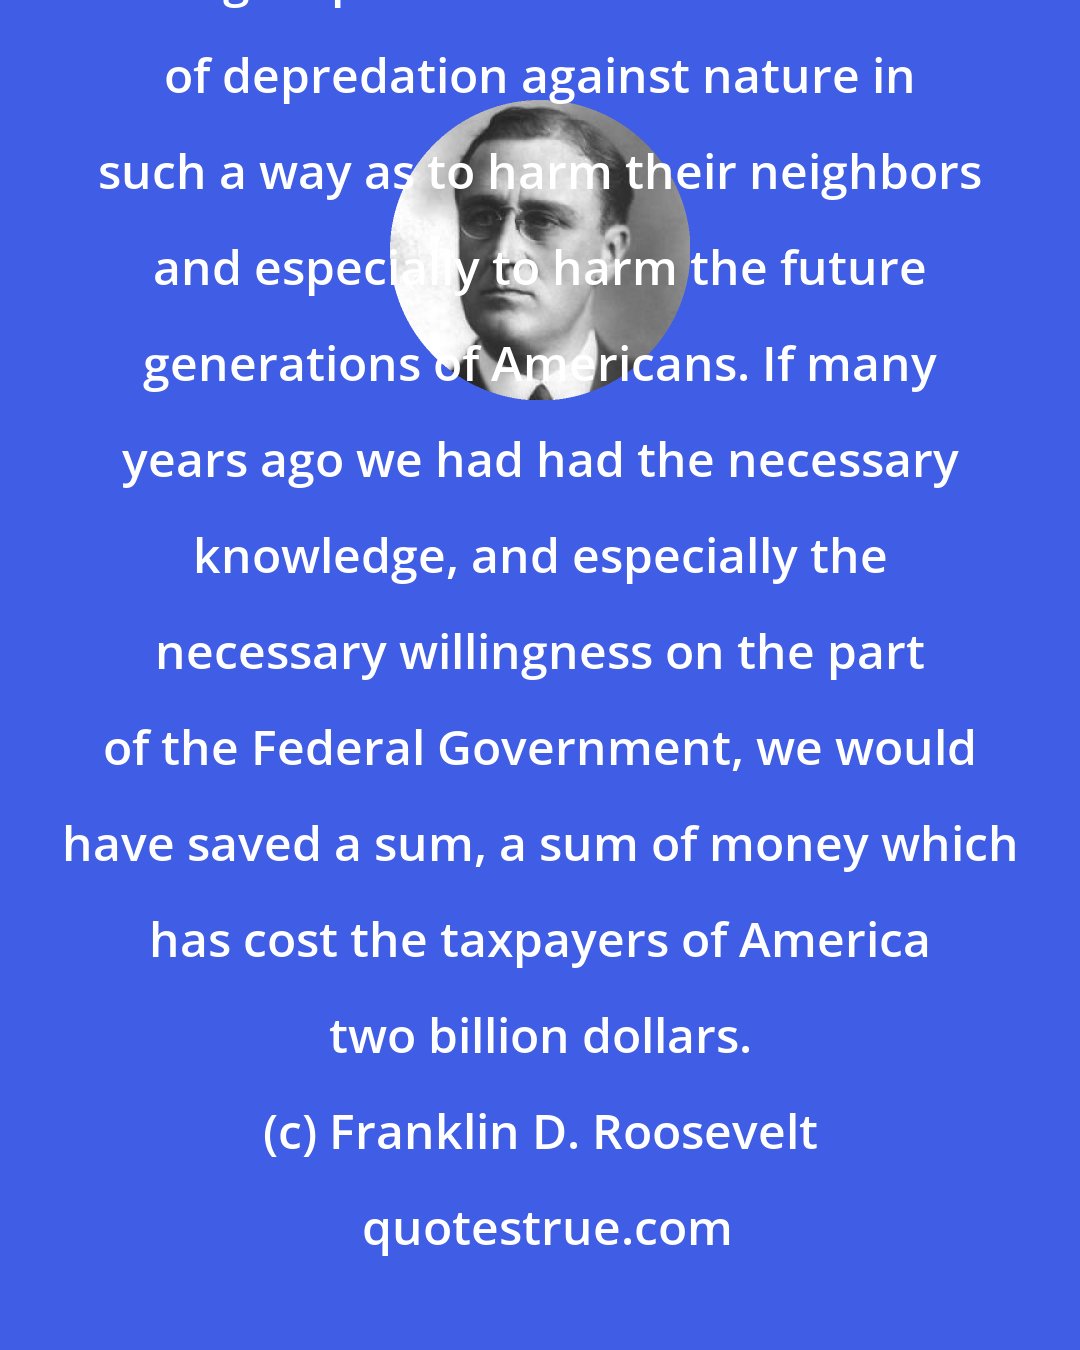 Franklin D. Roosevelt: [M]y conception of liberty does not permit an individual citizen or a group of citizens to commit acts of depredation against nature in such a way as to harm their neighbors and especially to harm the future generations of Americans. If many years ago we had had the necessary knowledge, and especially the necessary willingness on the part of the Federal Government, we would have saved a sum, a sum of money which has cost the taxpayers of America two billion dollars.